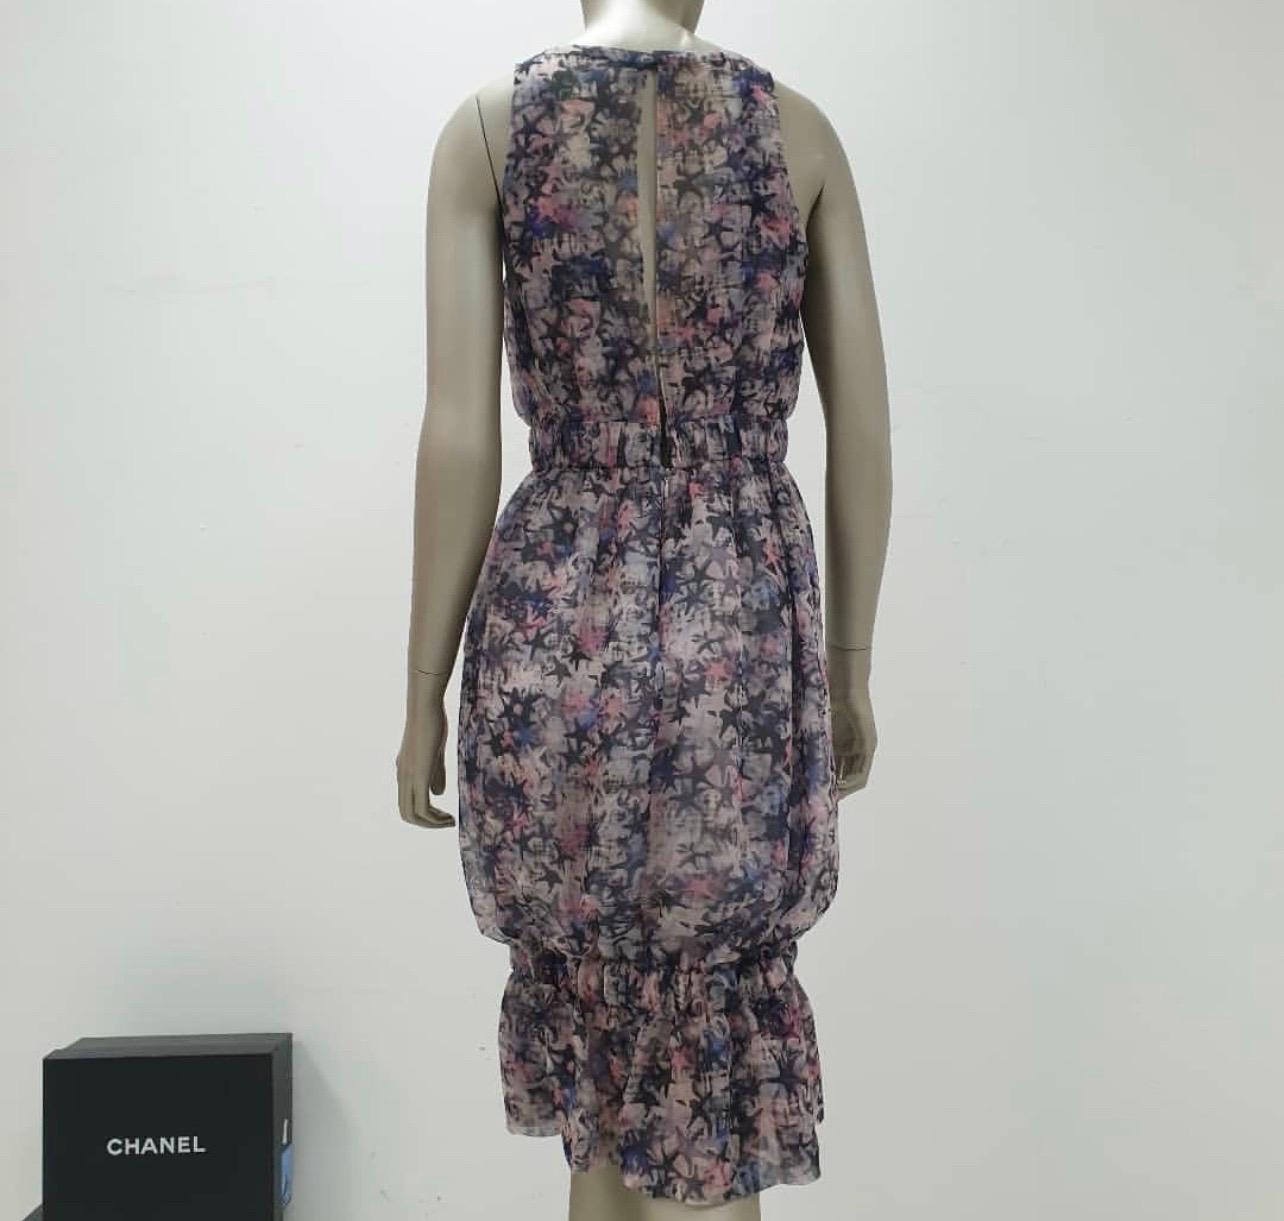 Chanel Silk Floral Summer Dress
Major look 20 from SS 2012/
ESt.retail price-$7255
Very good condition.

